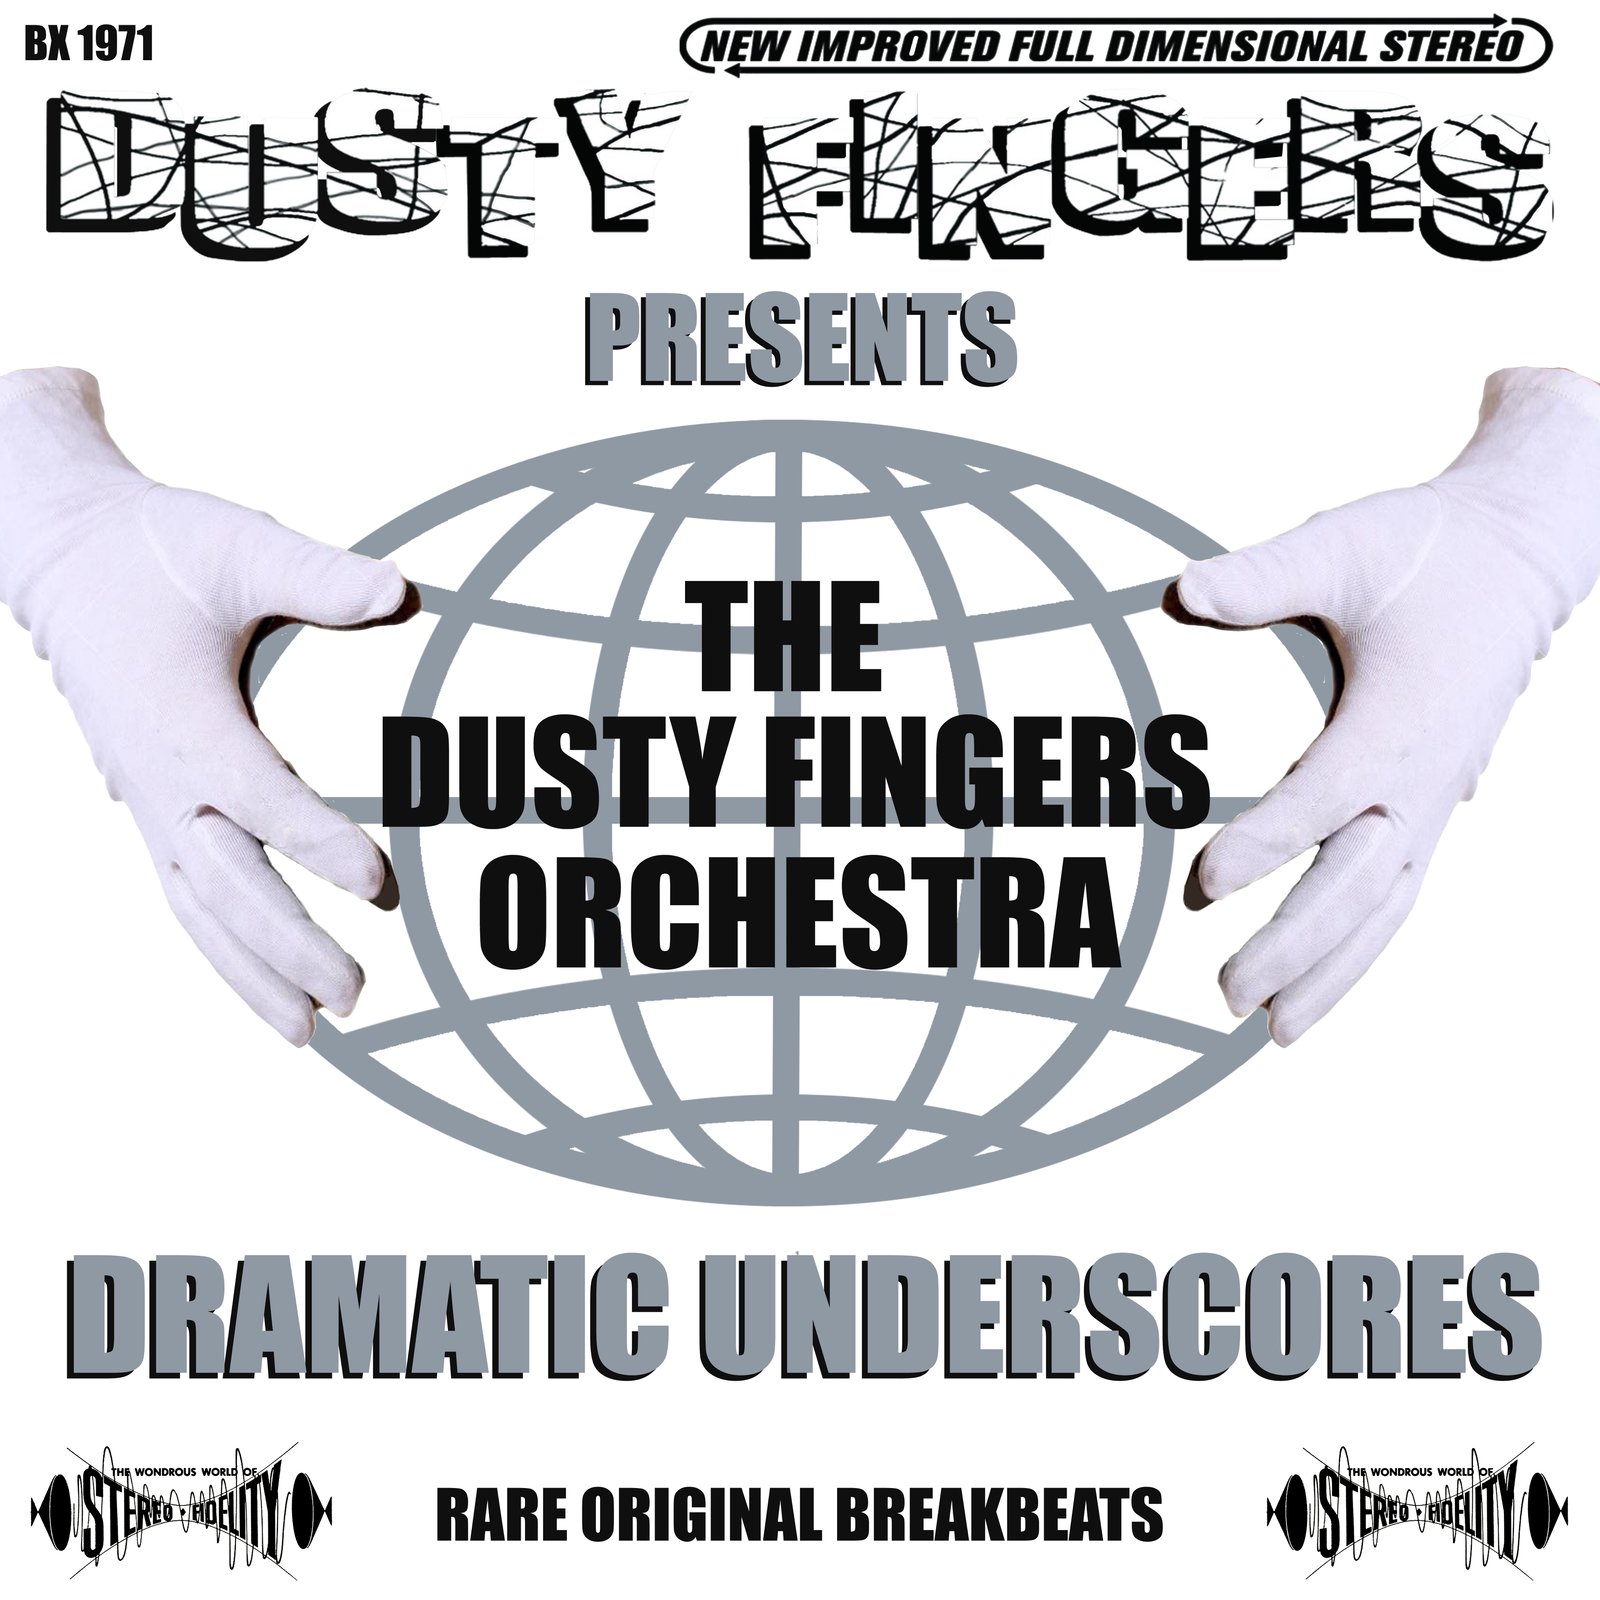 how can i find the complete dusty fingers collection